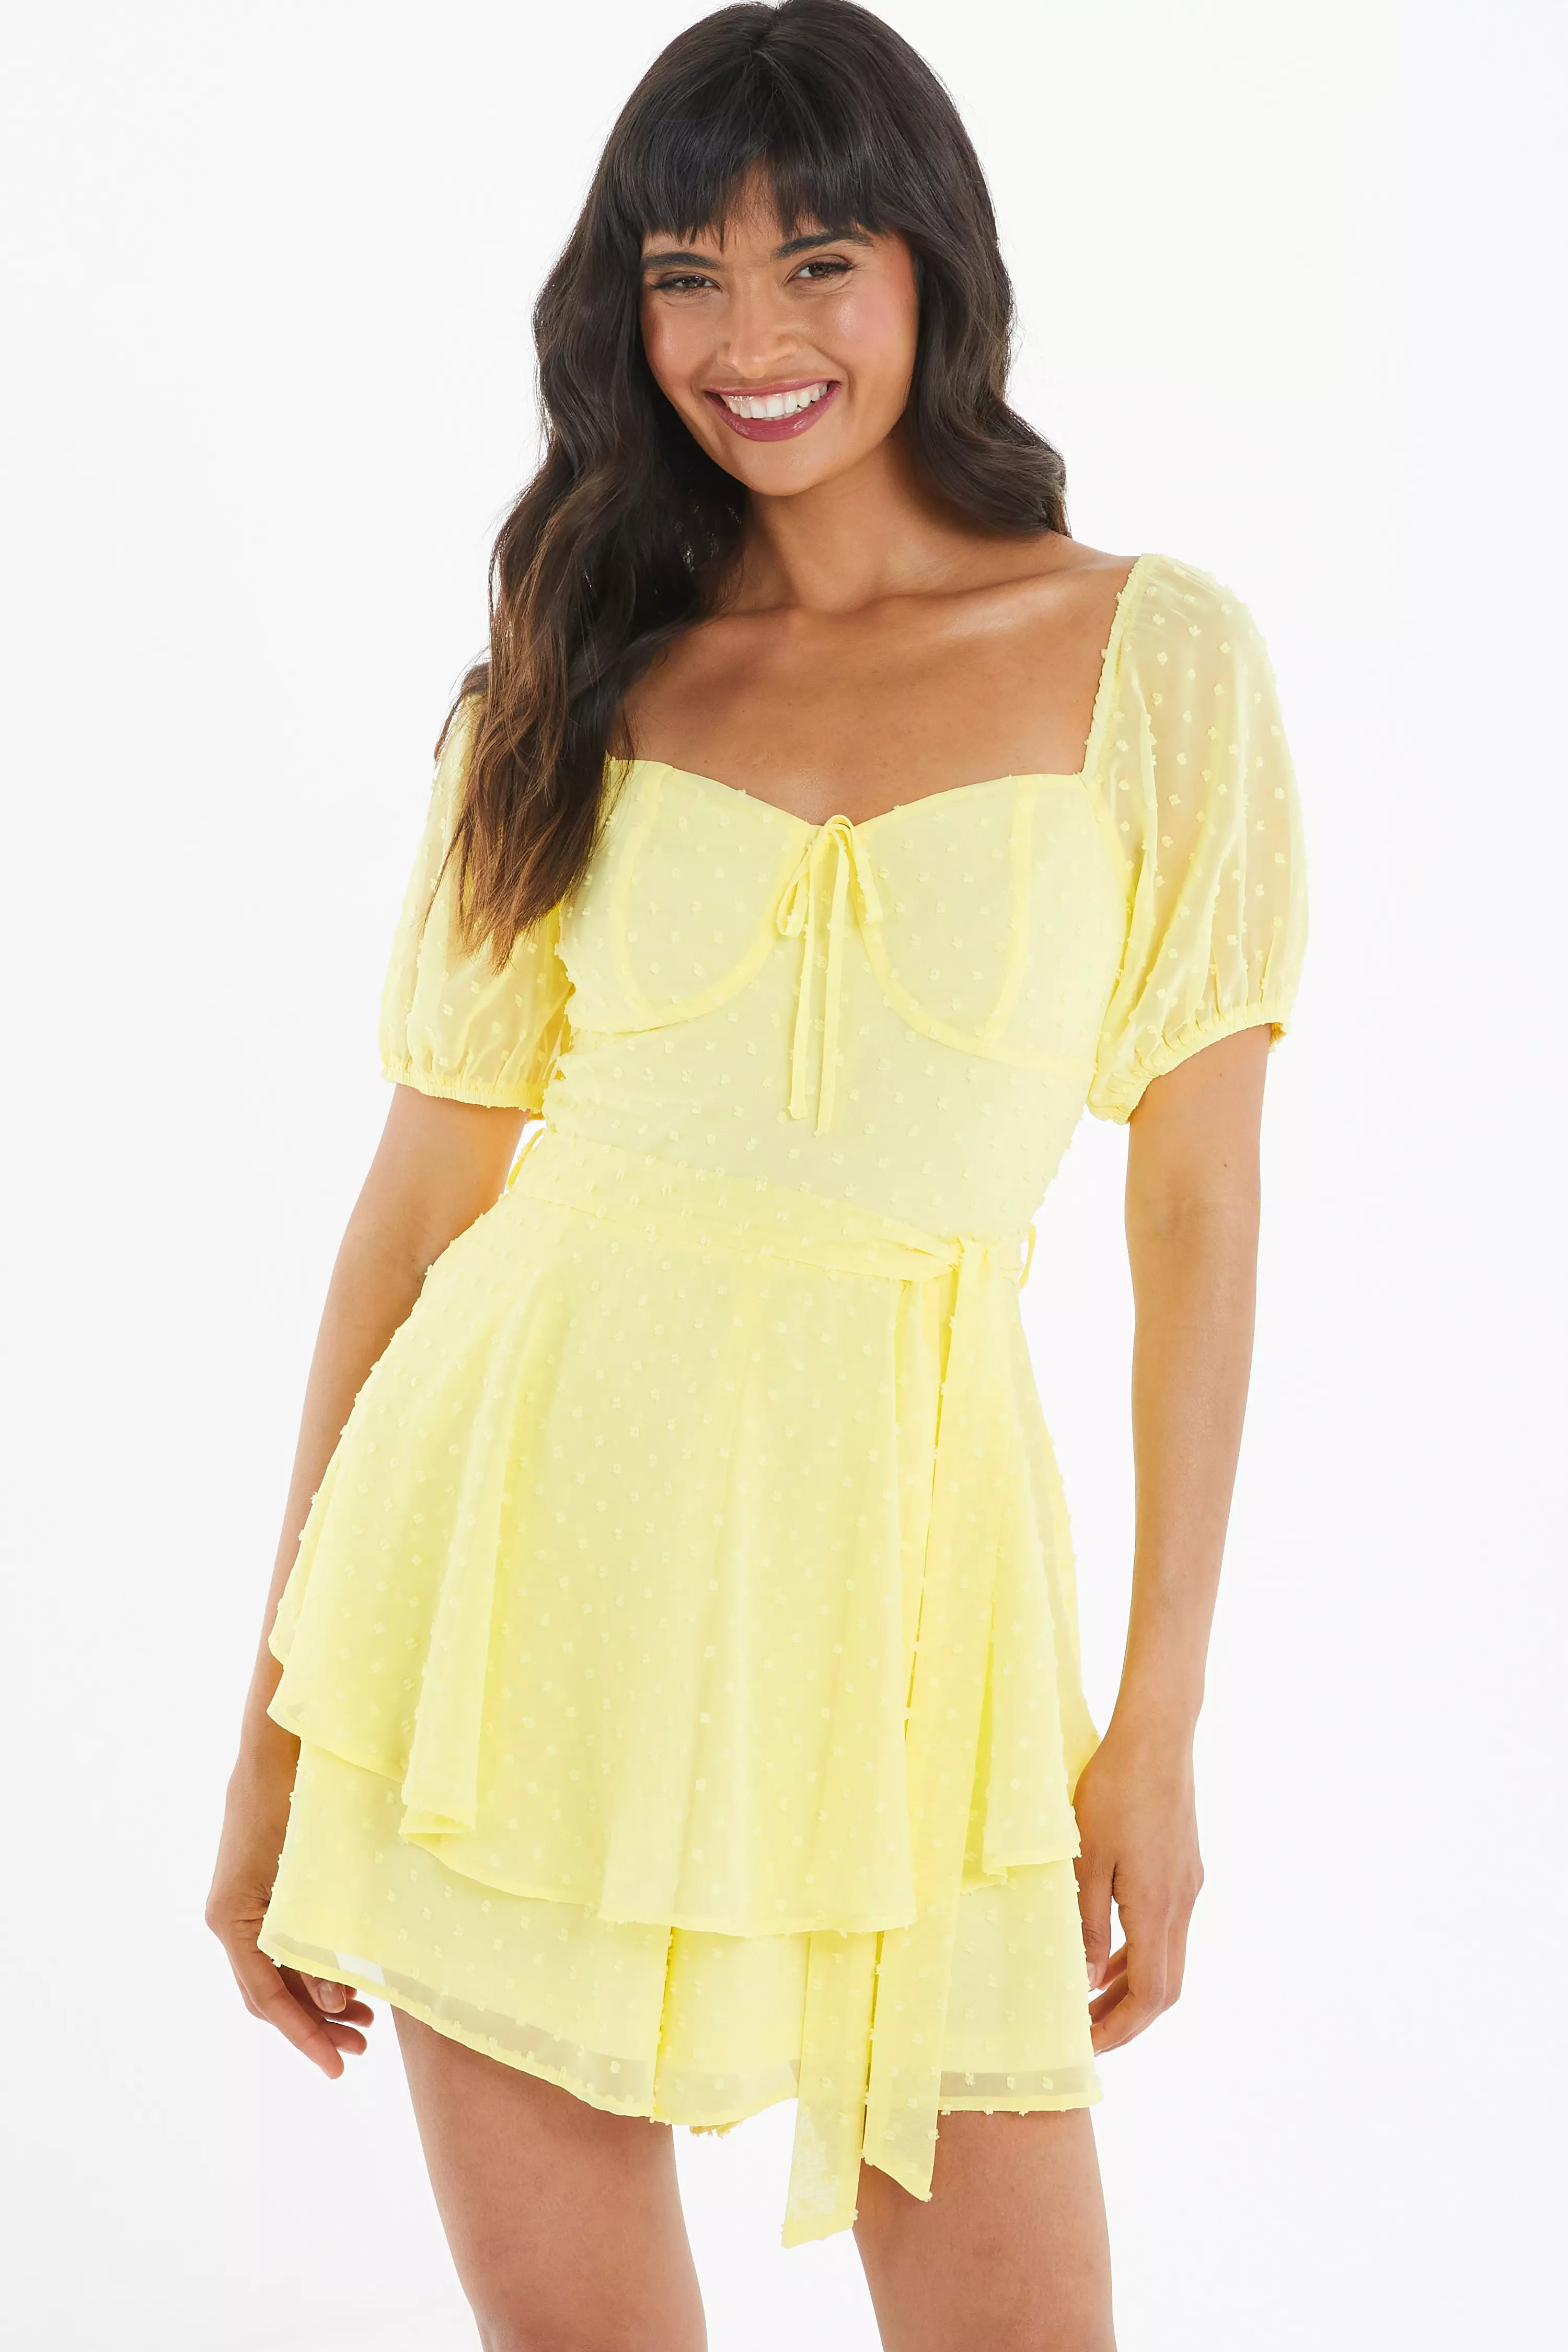 Yellow Chiffon Tie Front Playsuit